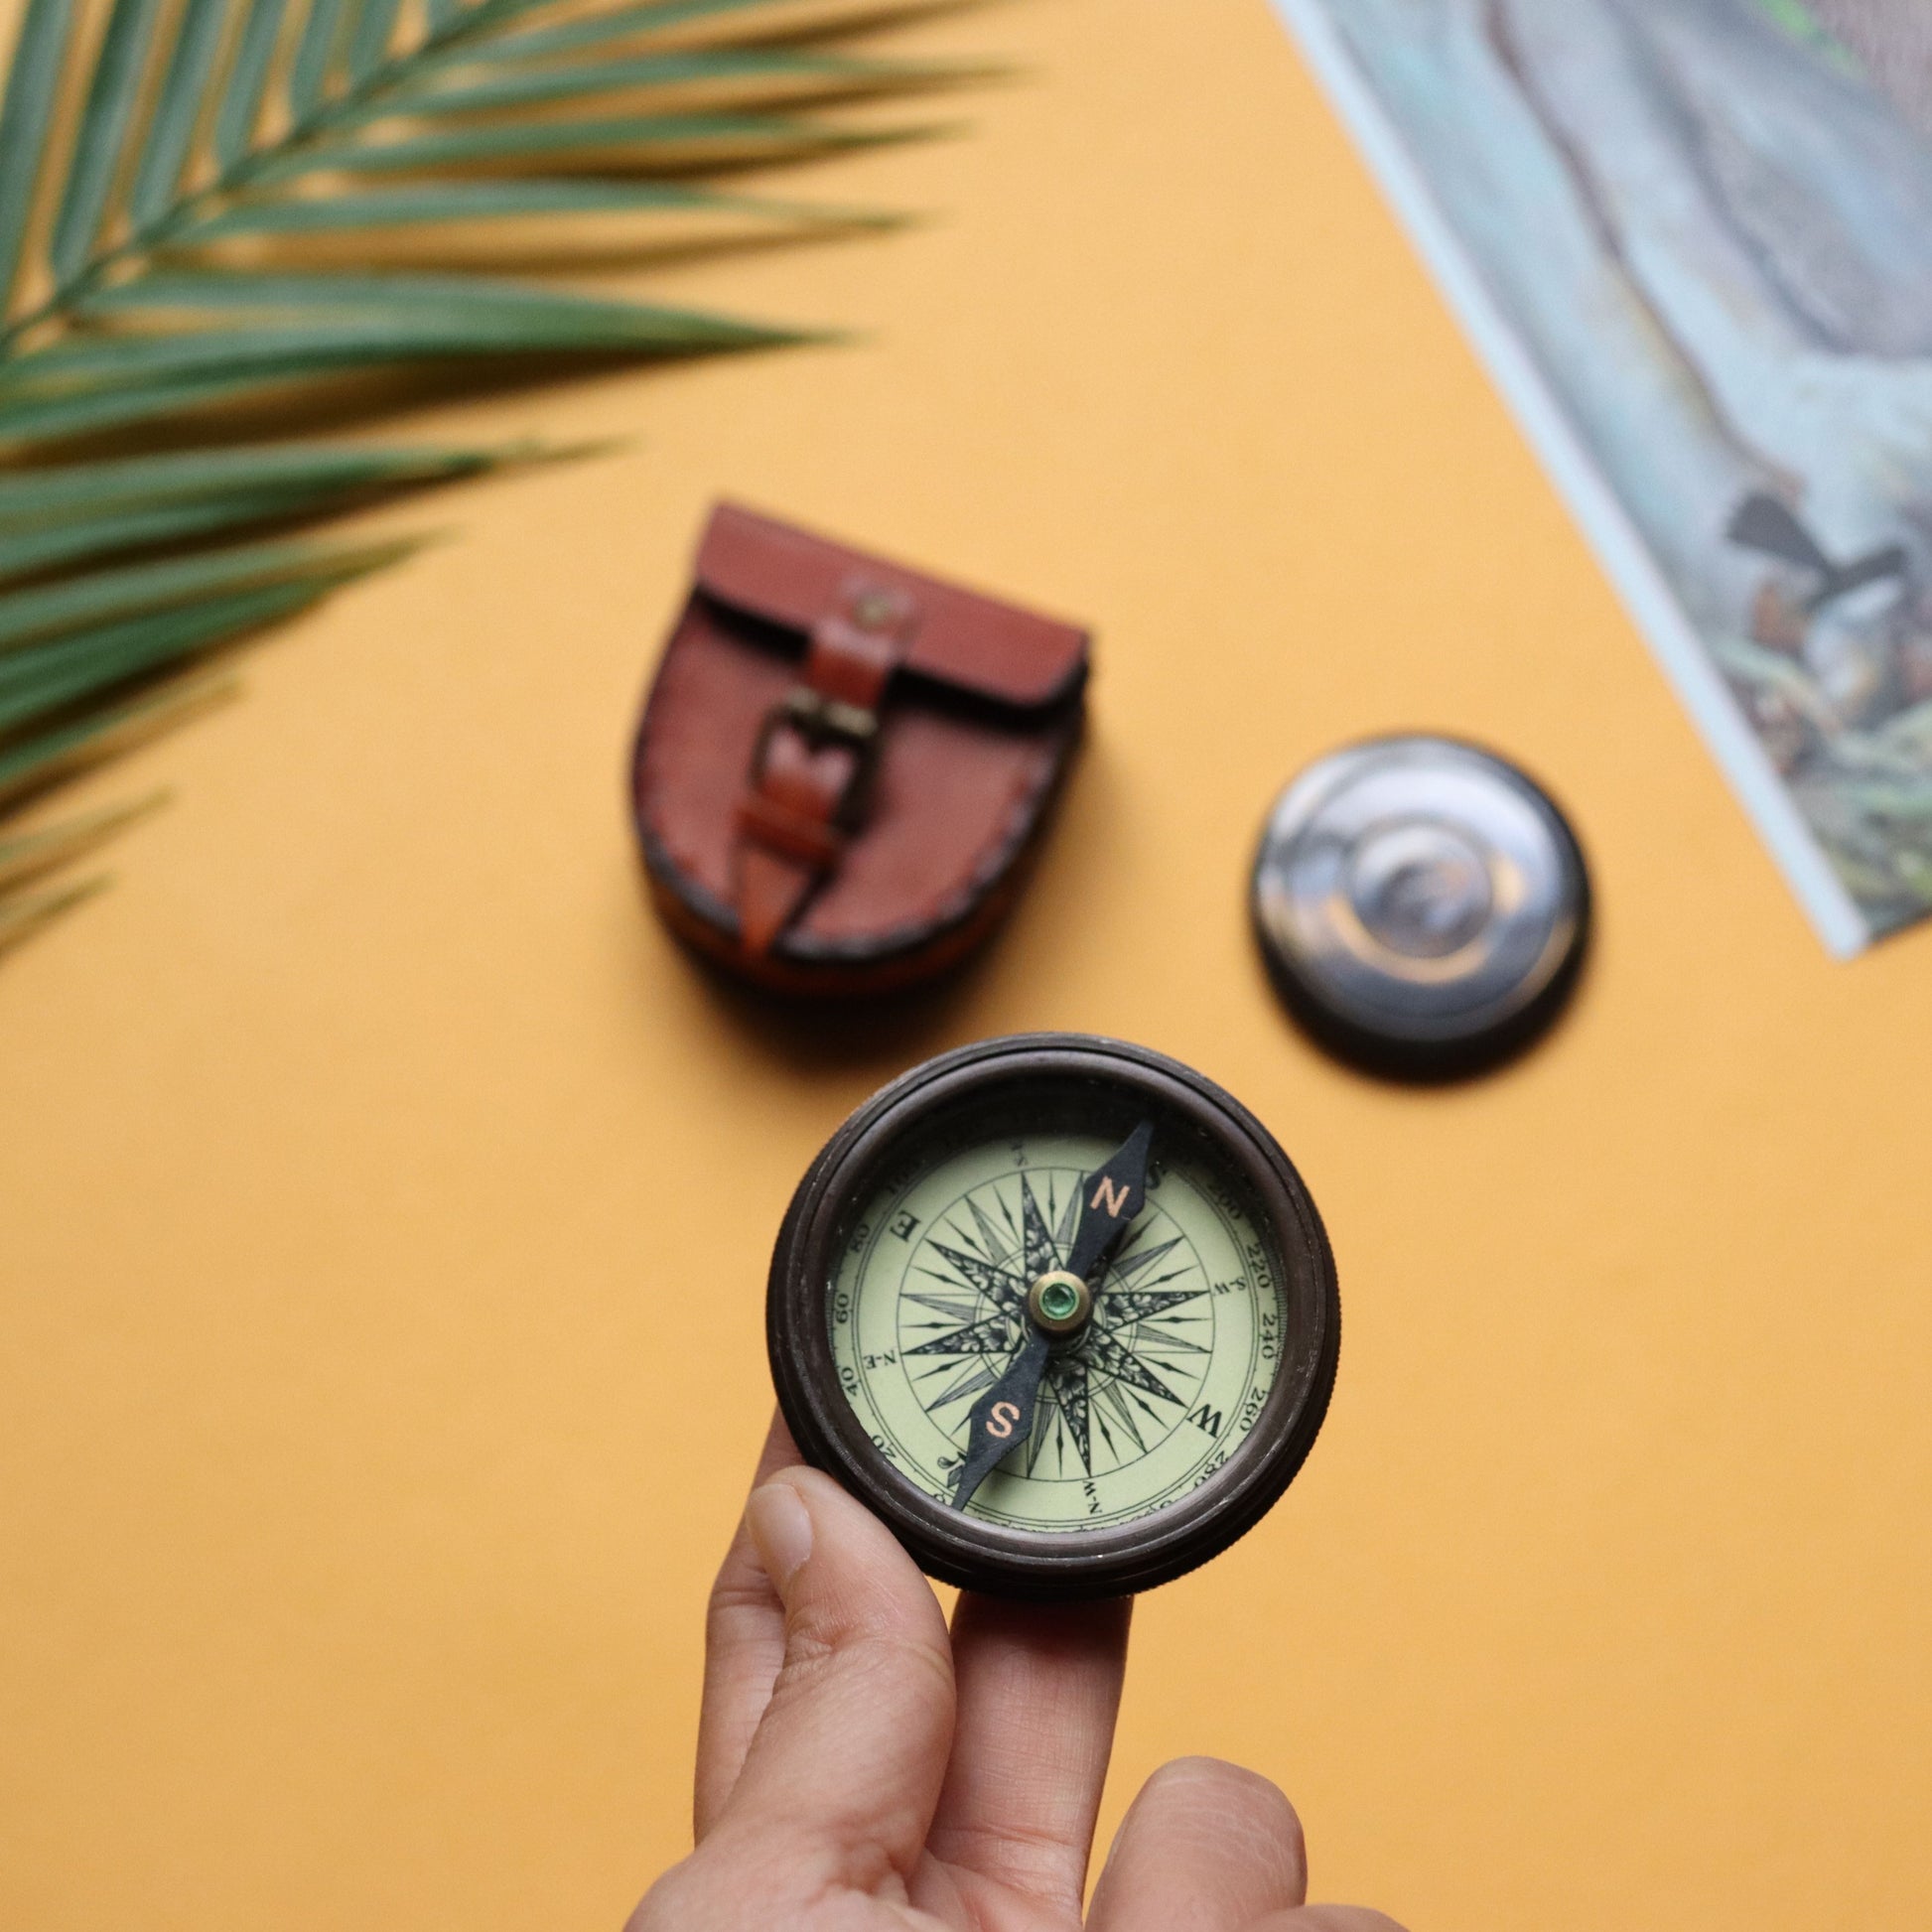 Pocket Brass Compass with Leather Case - Travellers Gift, Handmade - Aksa Home Decor 